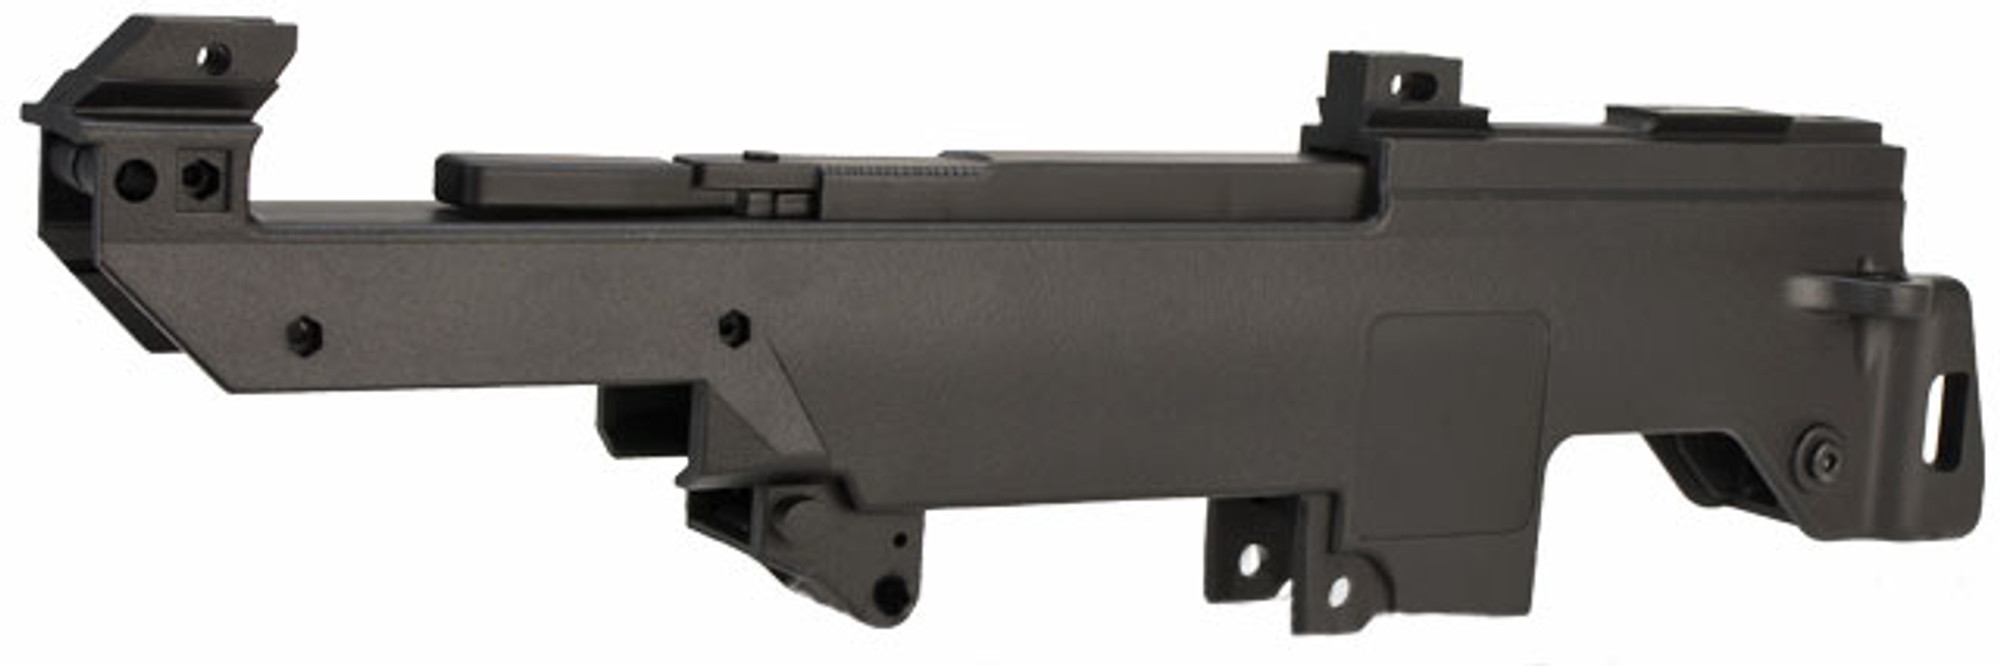 JG Replacement Upper Receiver for G36 series Airsoft AEG - Black